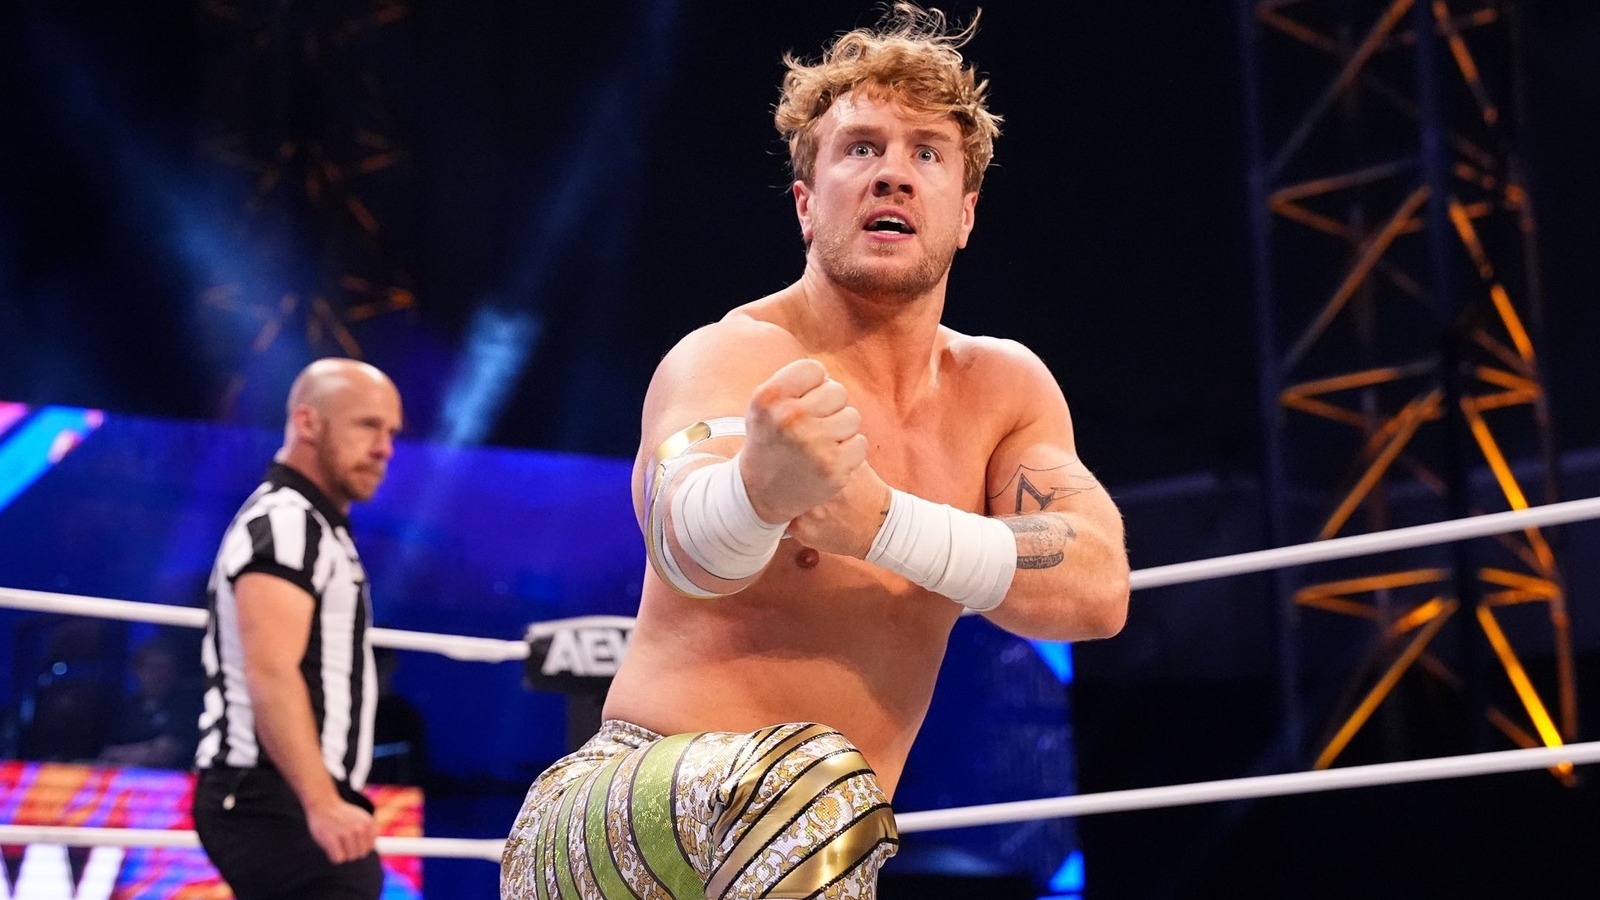 AEW's Will Ospreay Discusses Evolving As A Promo Artist, Dealing With ADHD